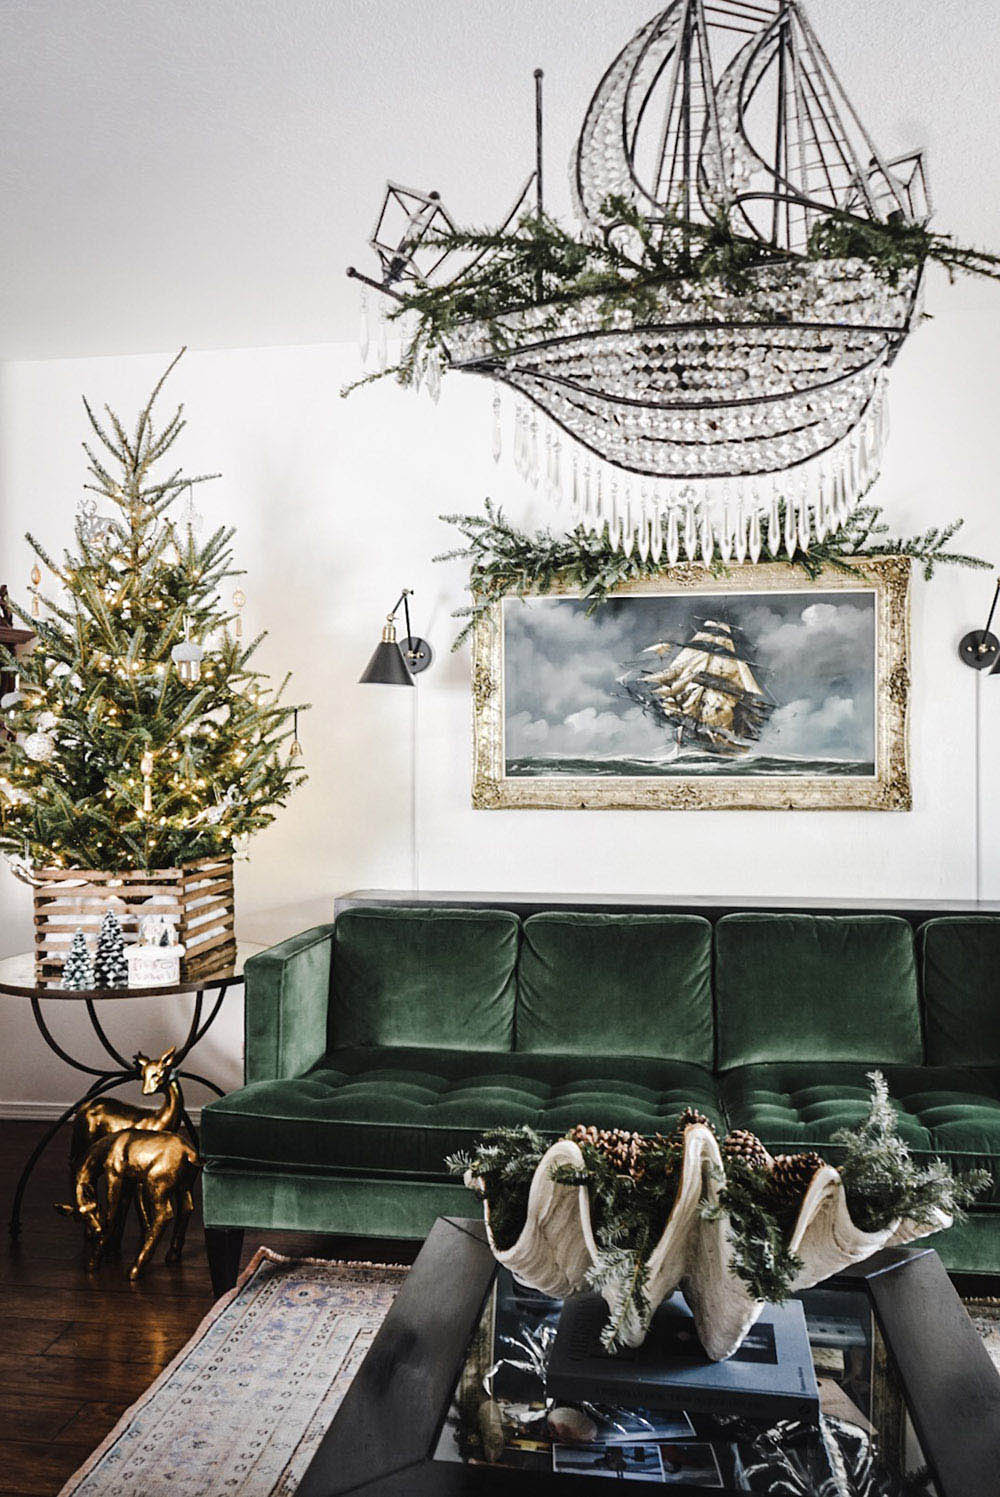 A nautical themed room with a green sofa and holiday greenery.